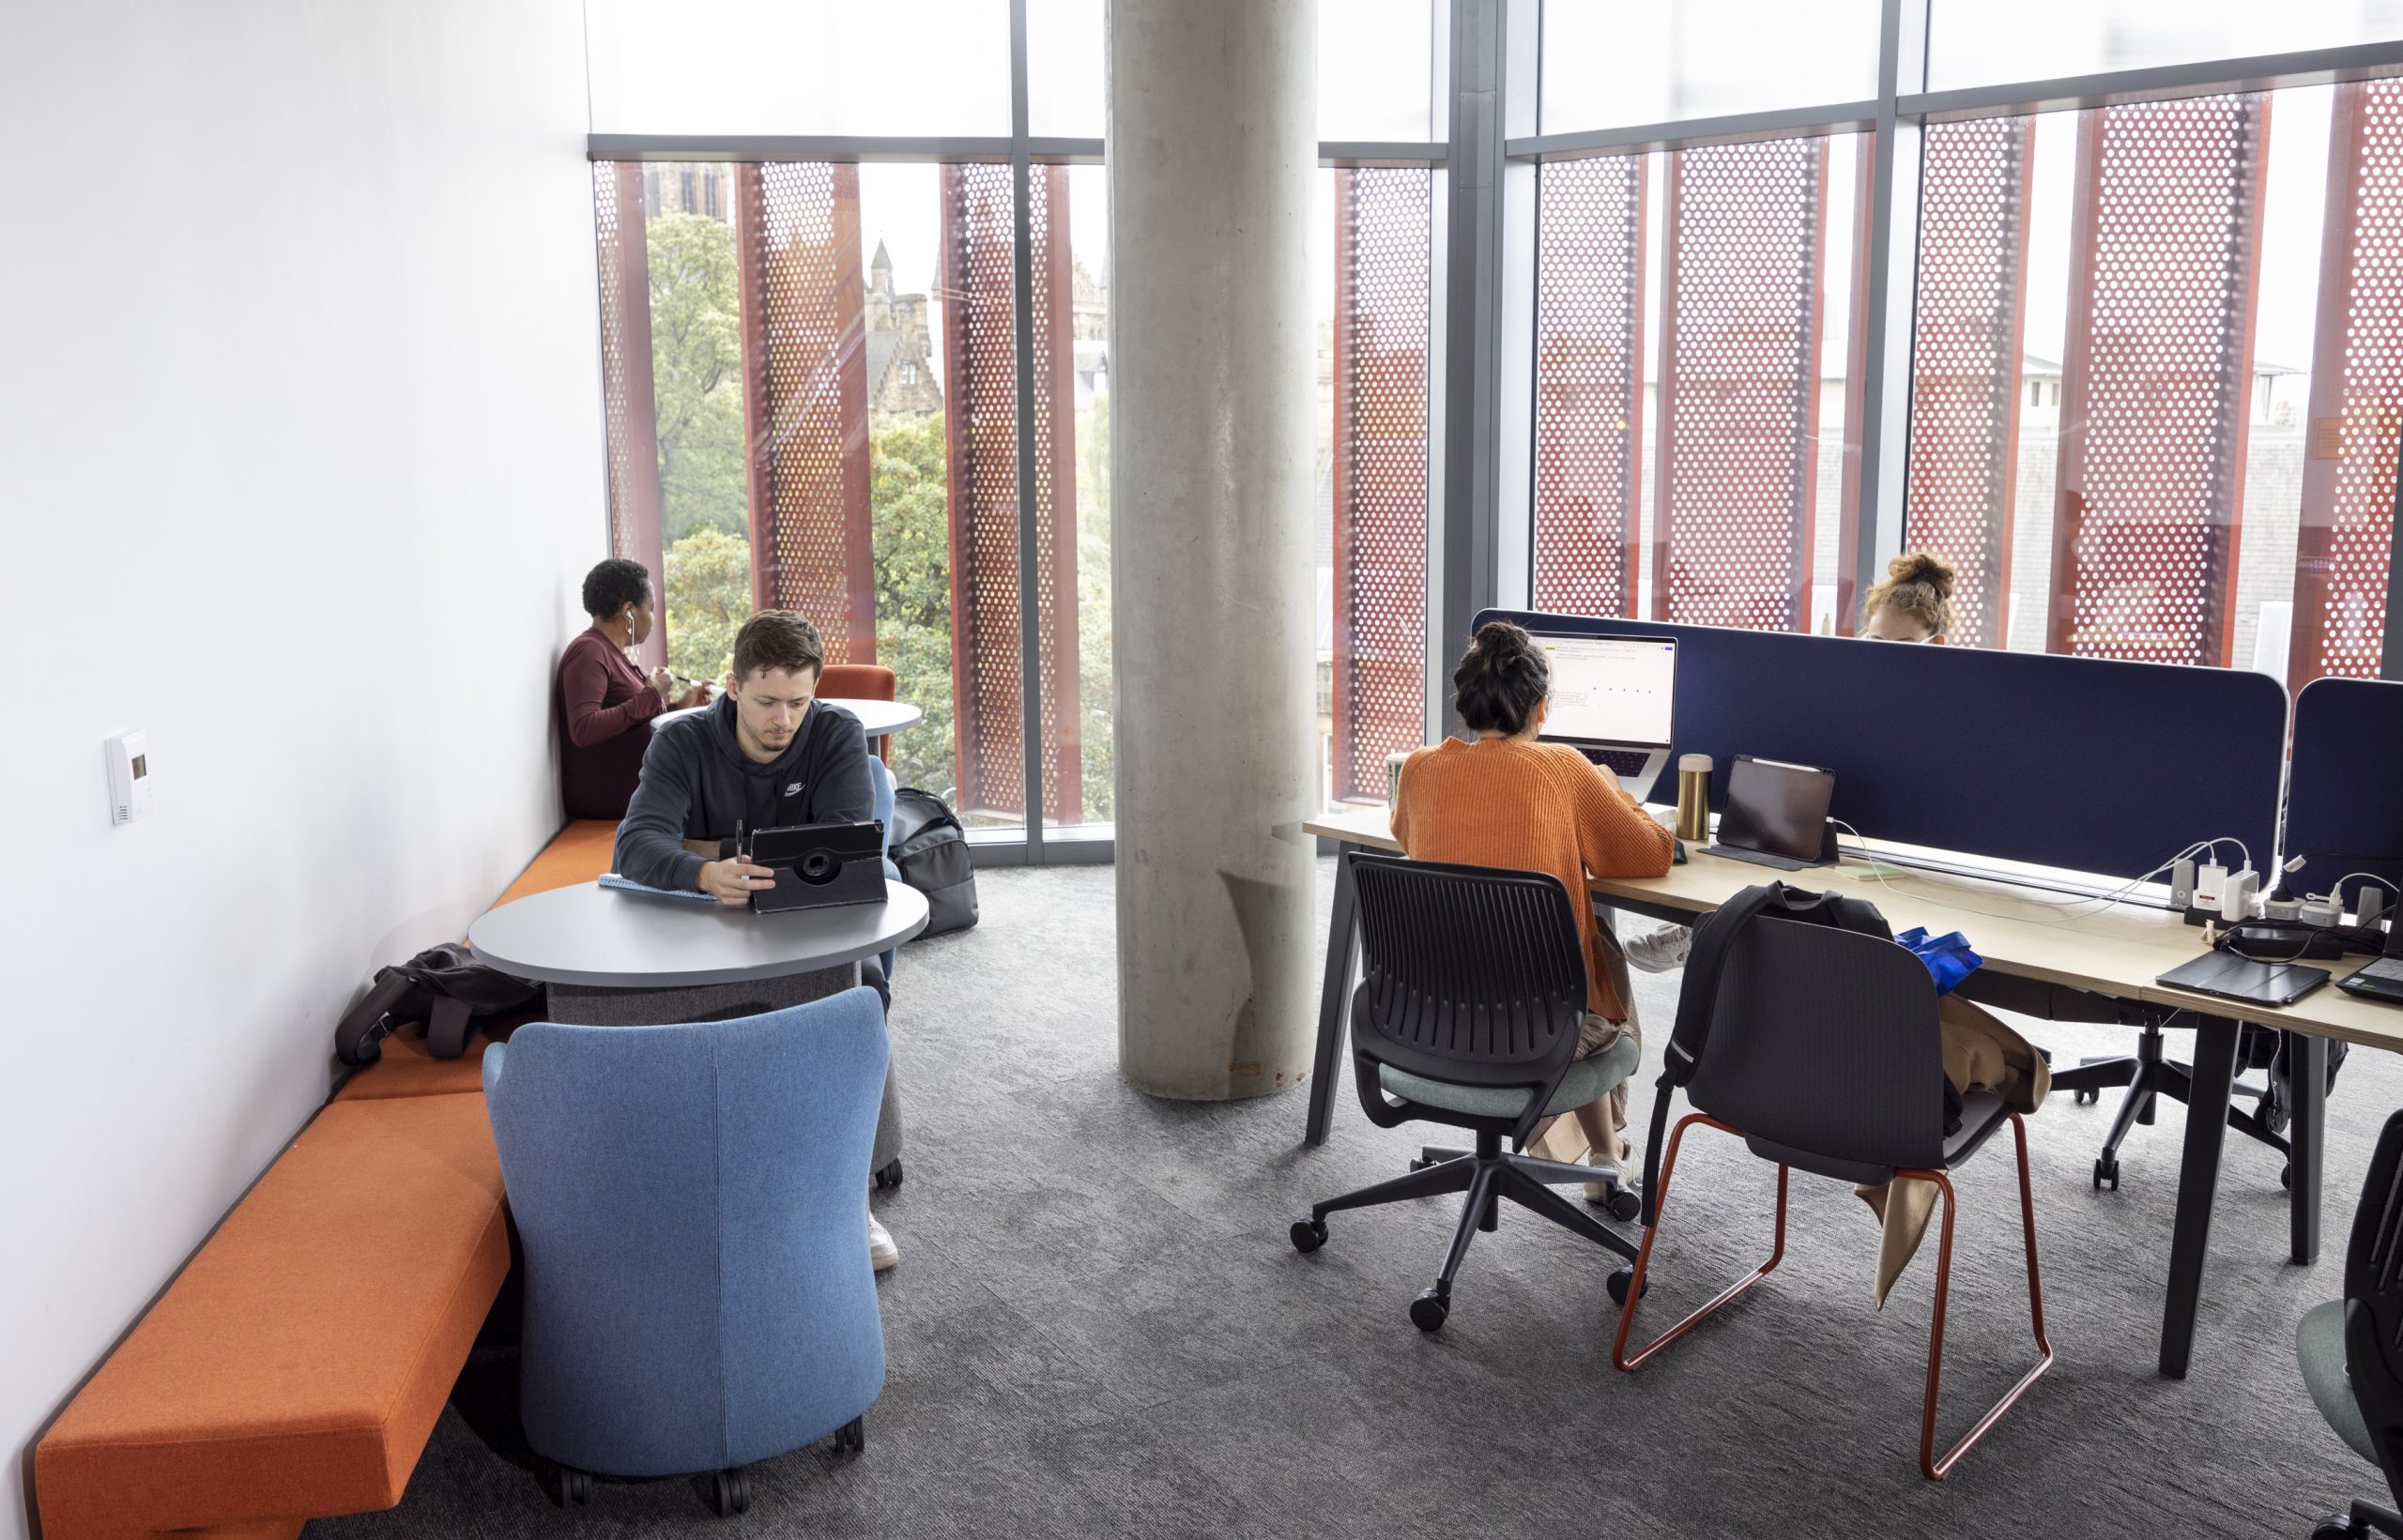 Glasgow’s New Learning Hub: An Investment in Students and their Future 360 magazine